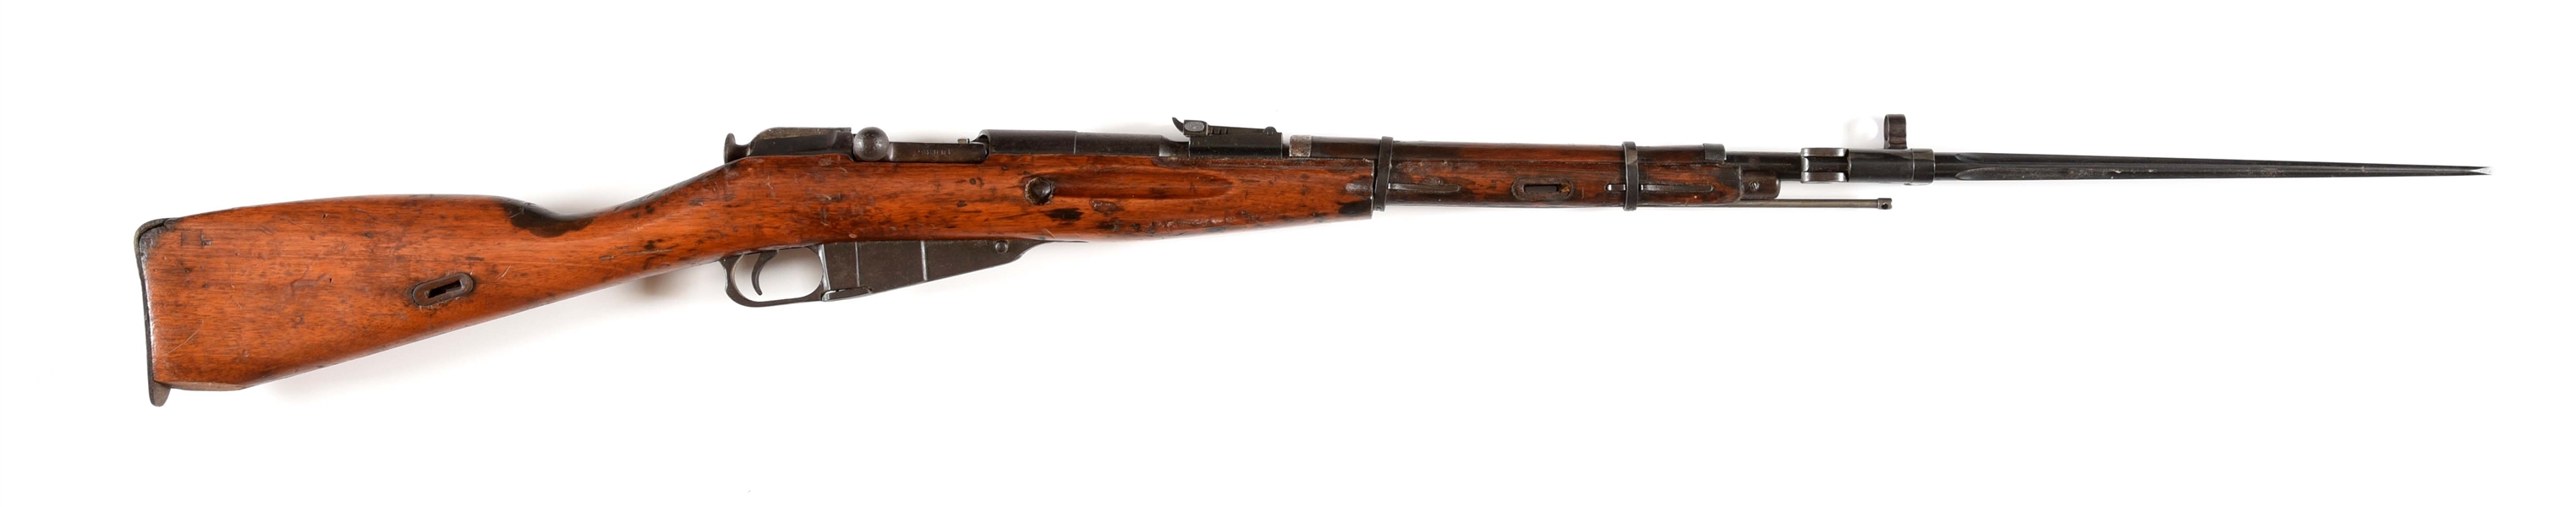 (C) CHINESE ARSENAL 26 "1960" DATED TYPE 53 BOLT ACTION CARBINE.